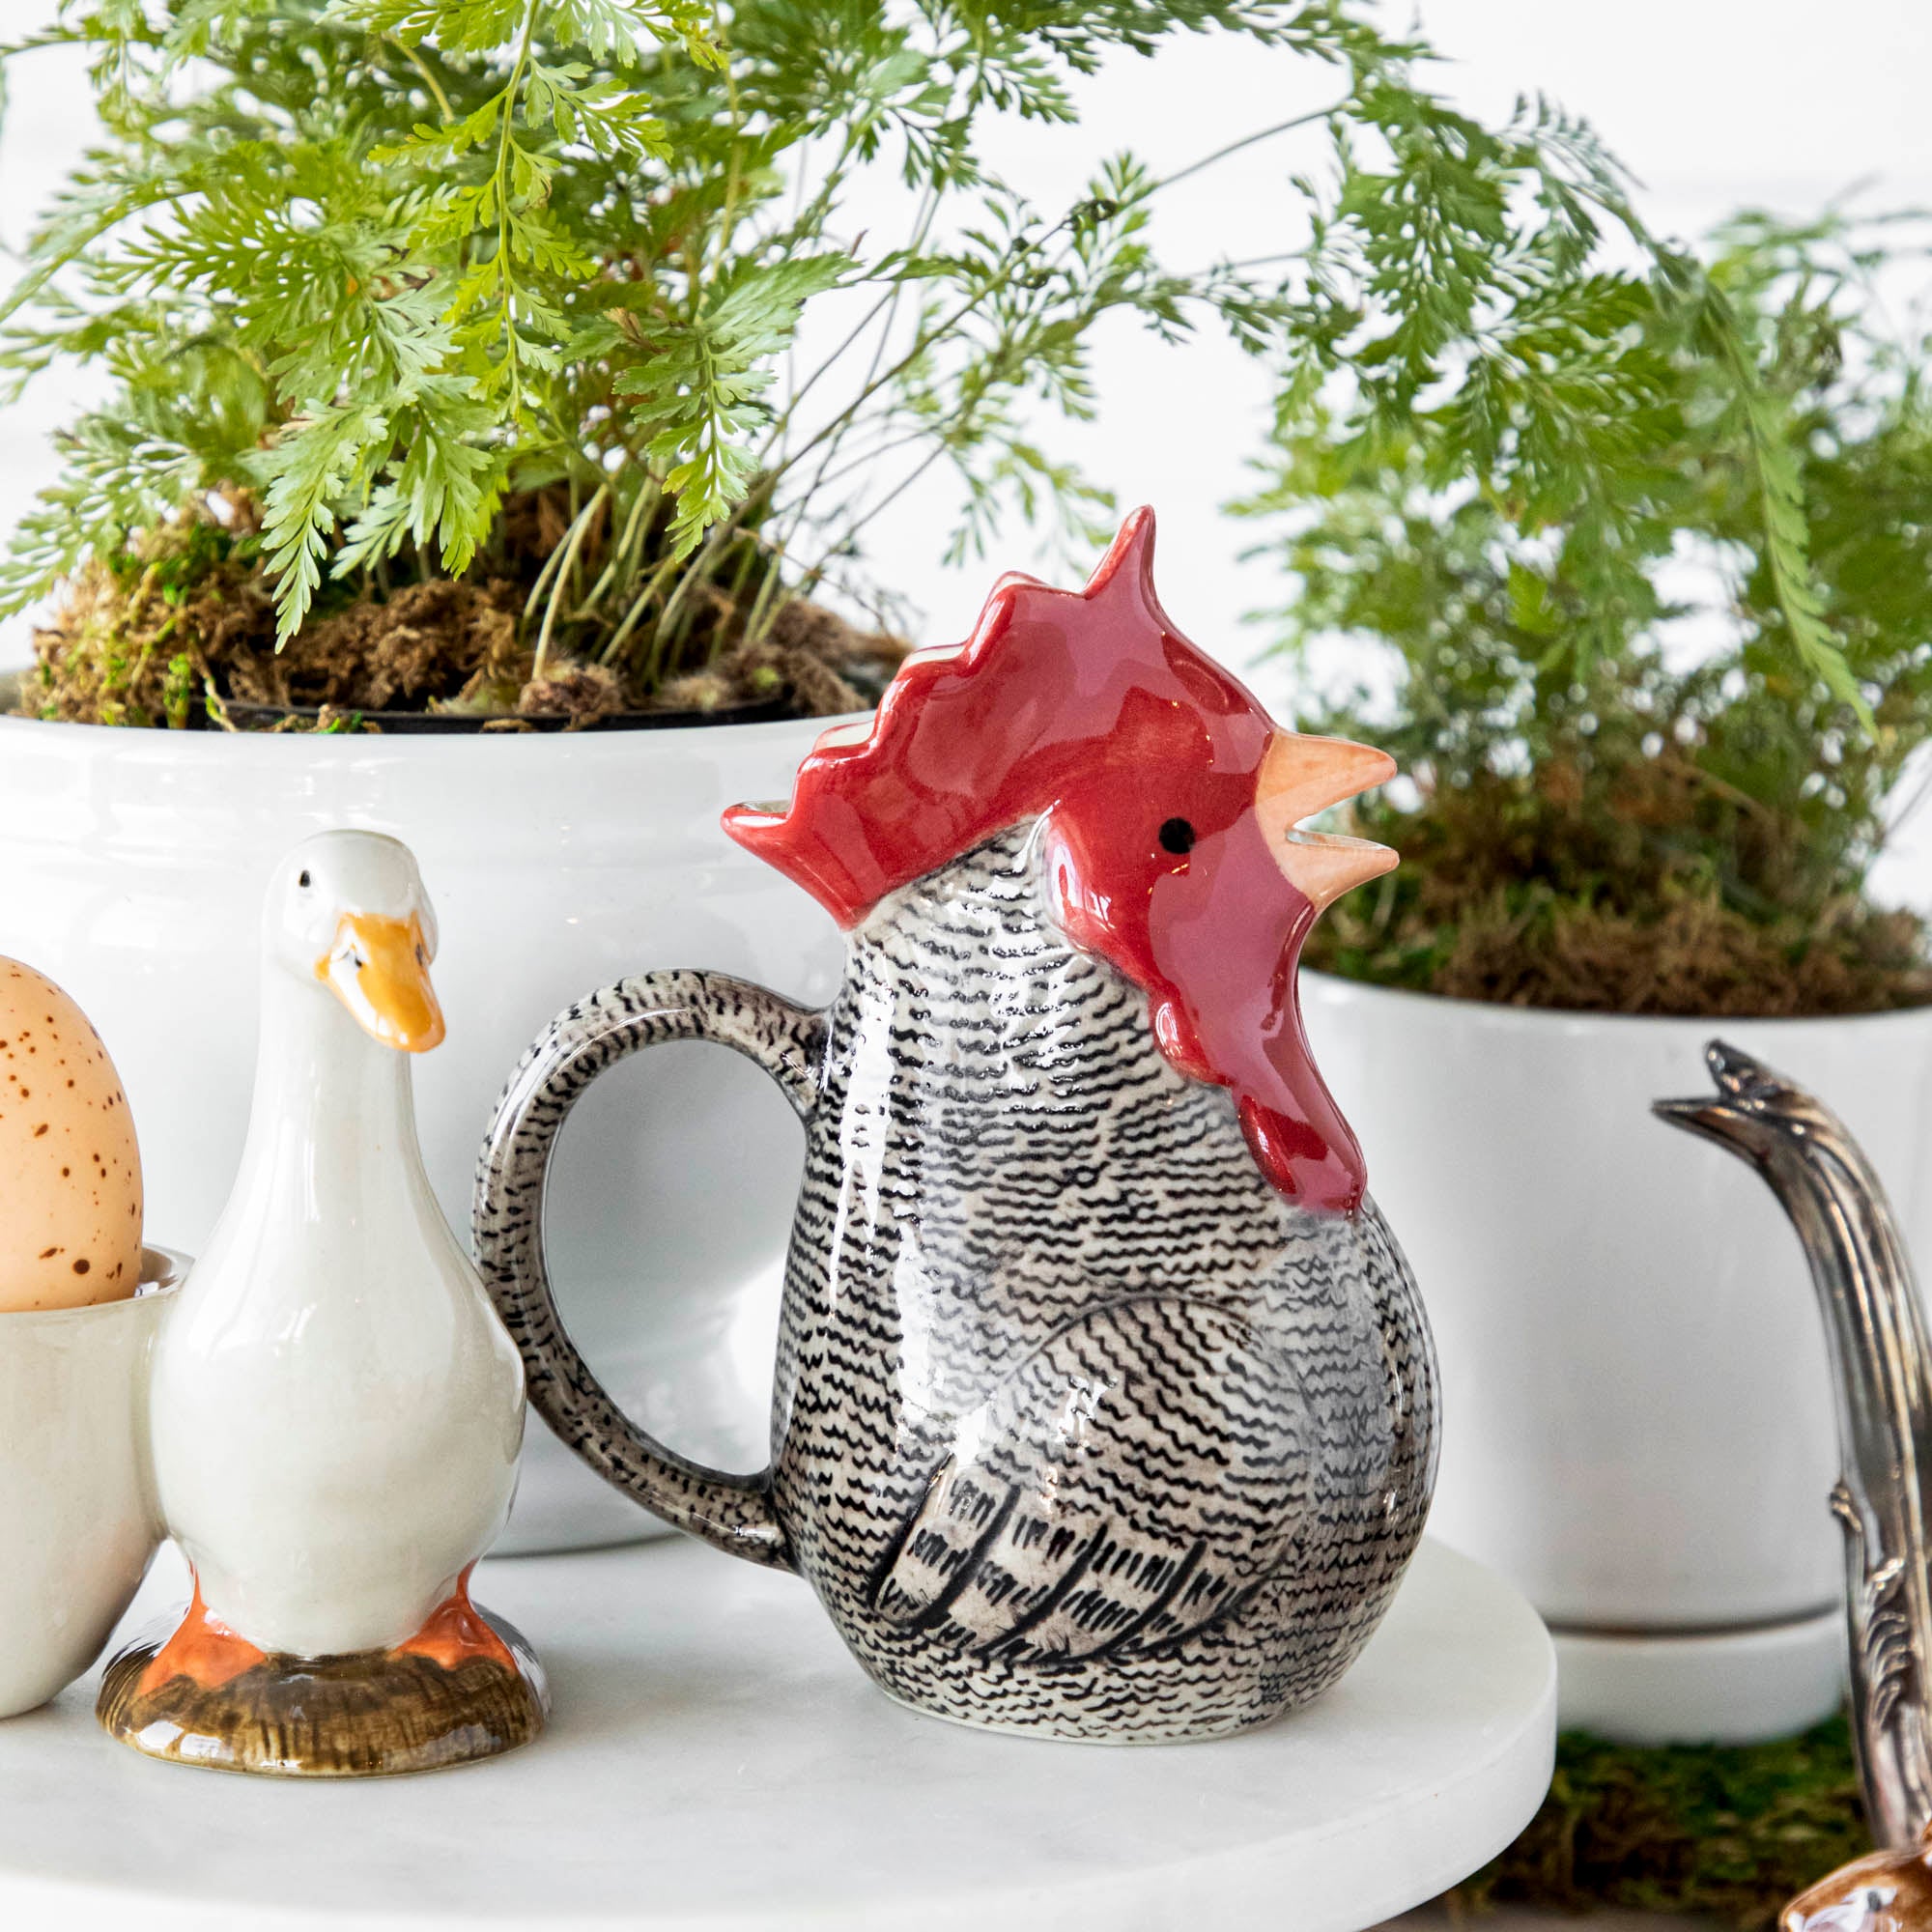 A quirky Farm Animal Ceramics mug from Quail, along with a plate of delicious eggs and a vibrant potted plant, all displayed on a table.